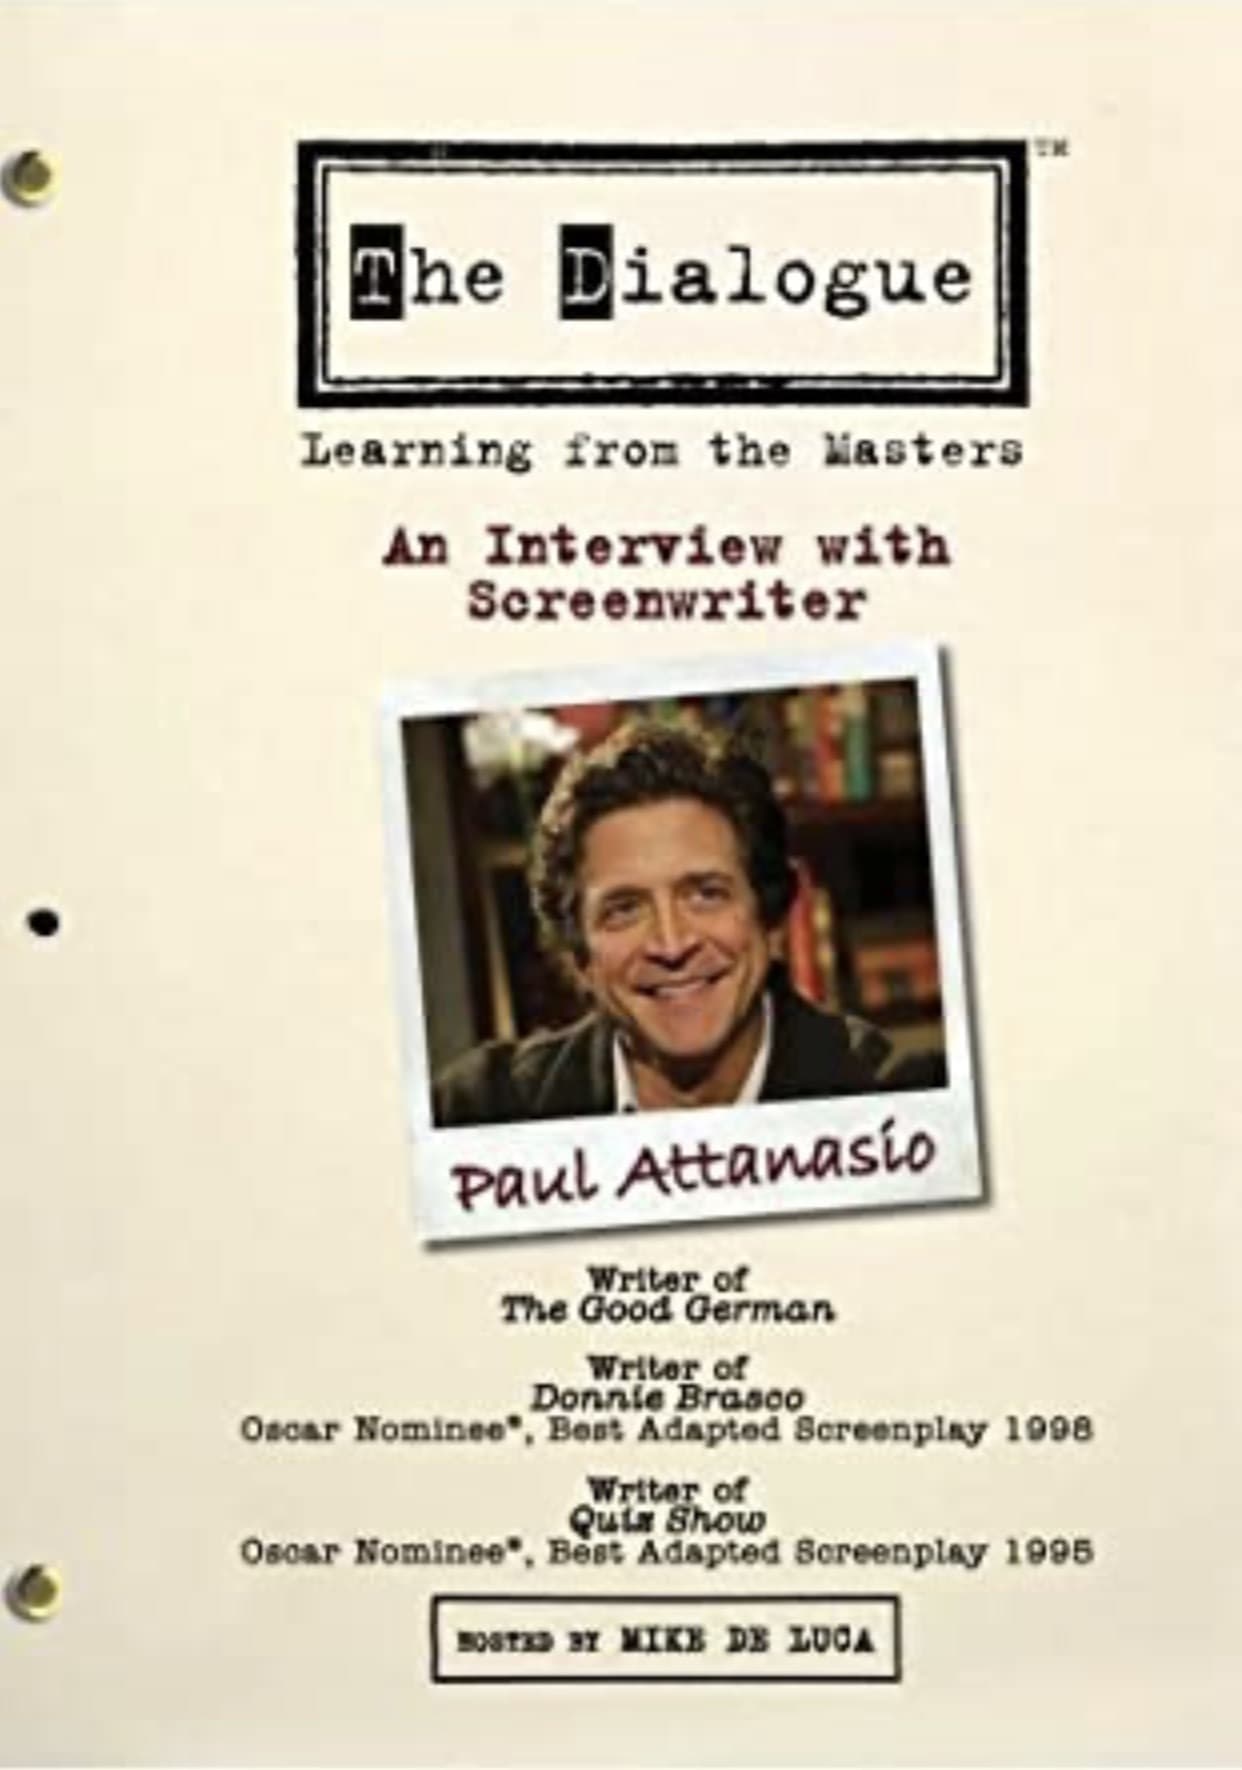 The Dialogue: An Interview with Screenwriter Paul Attanasio (2007)